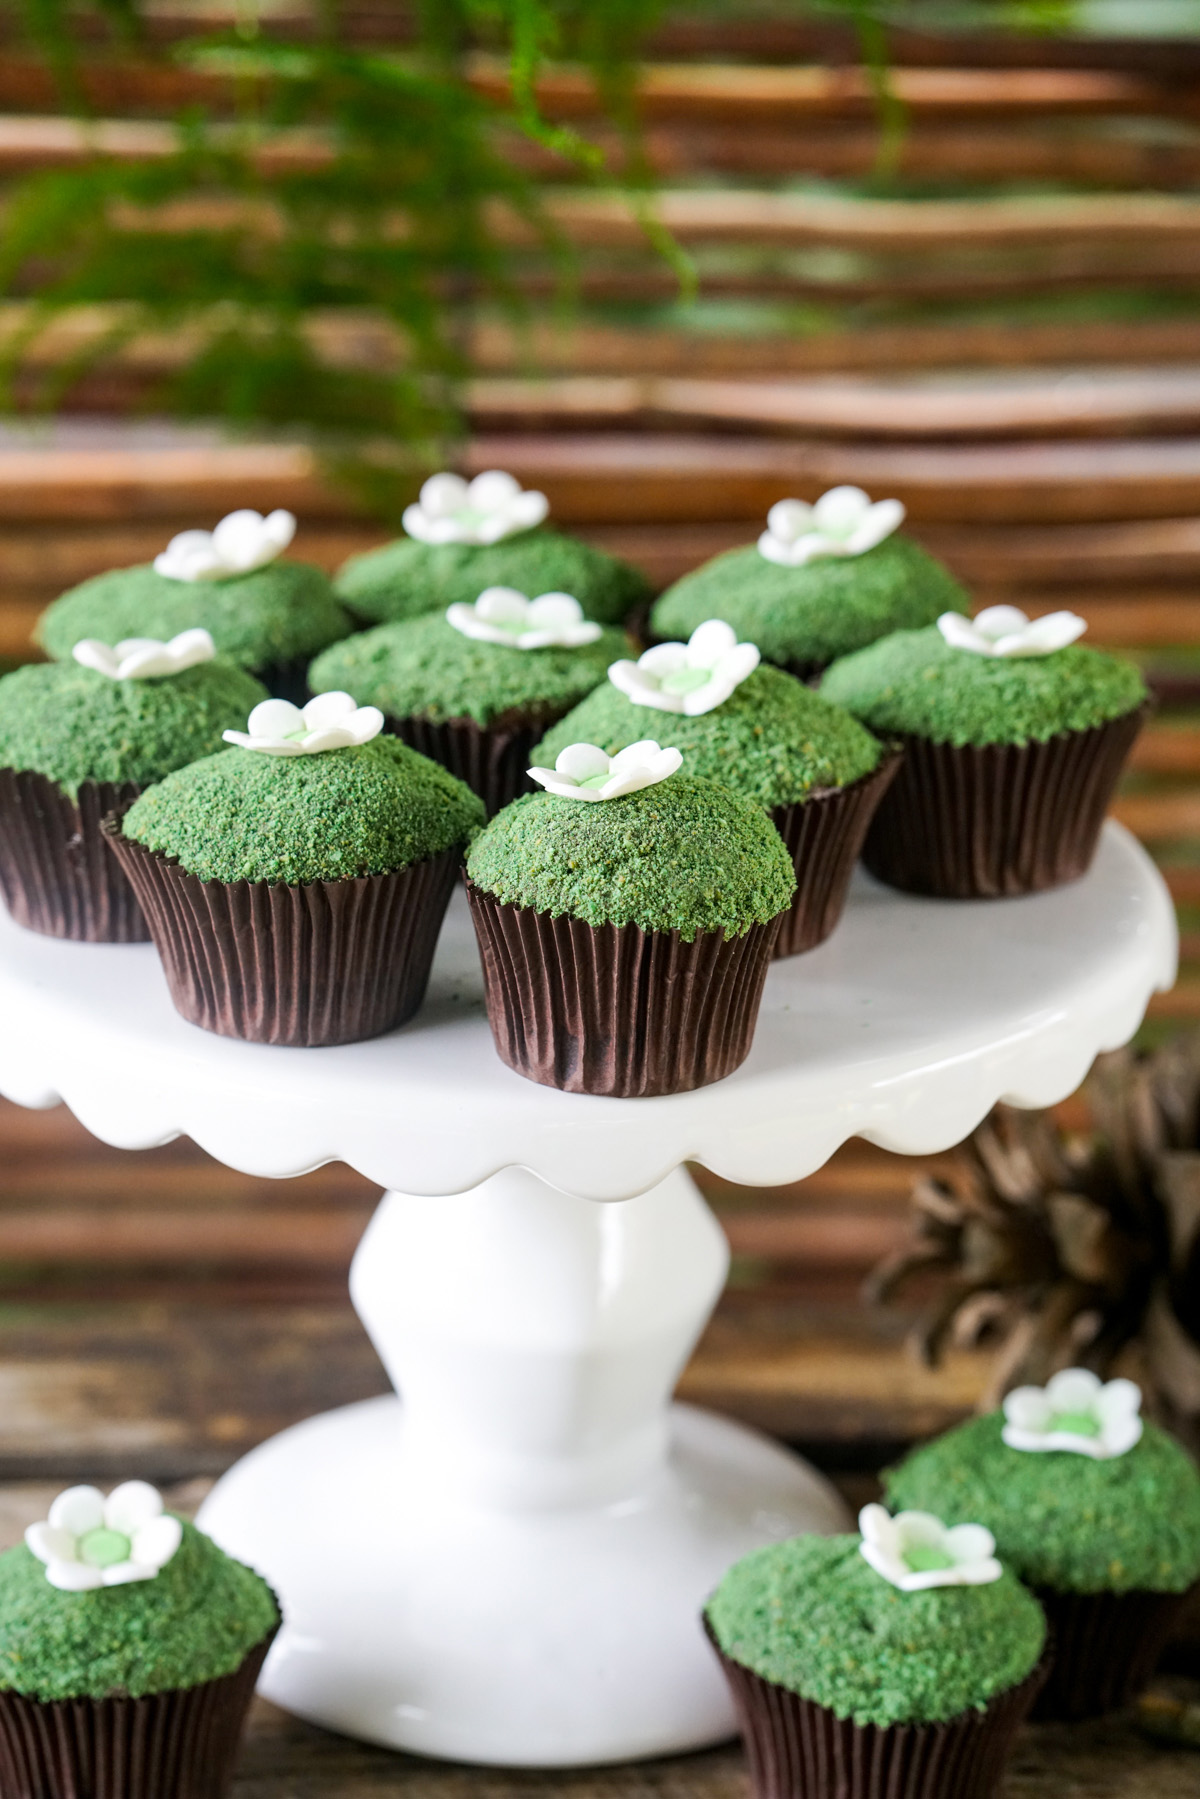 Boho Enchanted Forest Party Cupcake Ideas with green coconut placed on top as moss and finished off with a white daisy